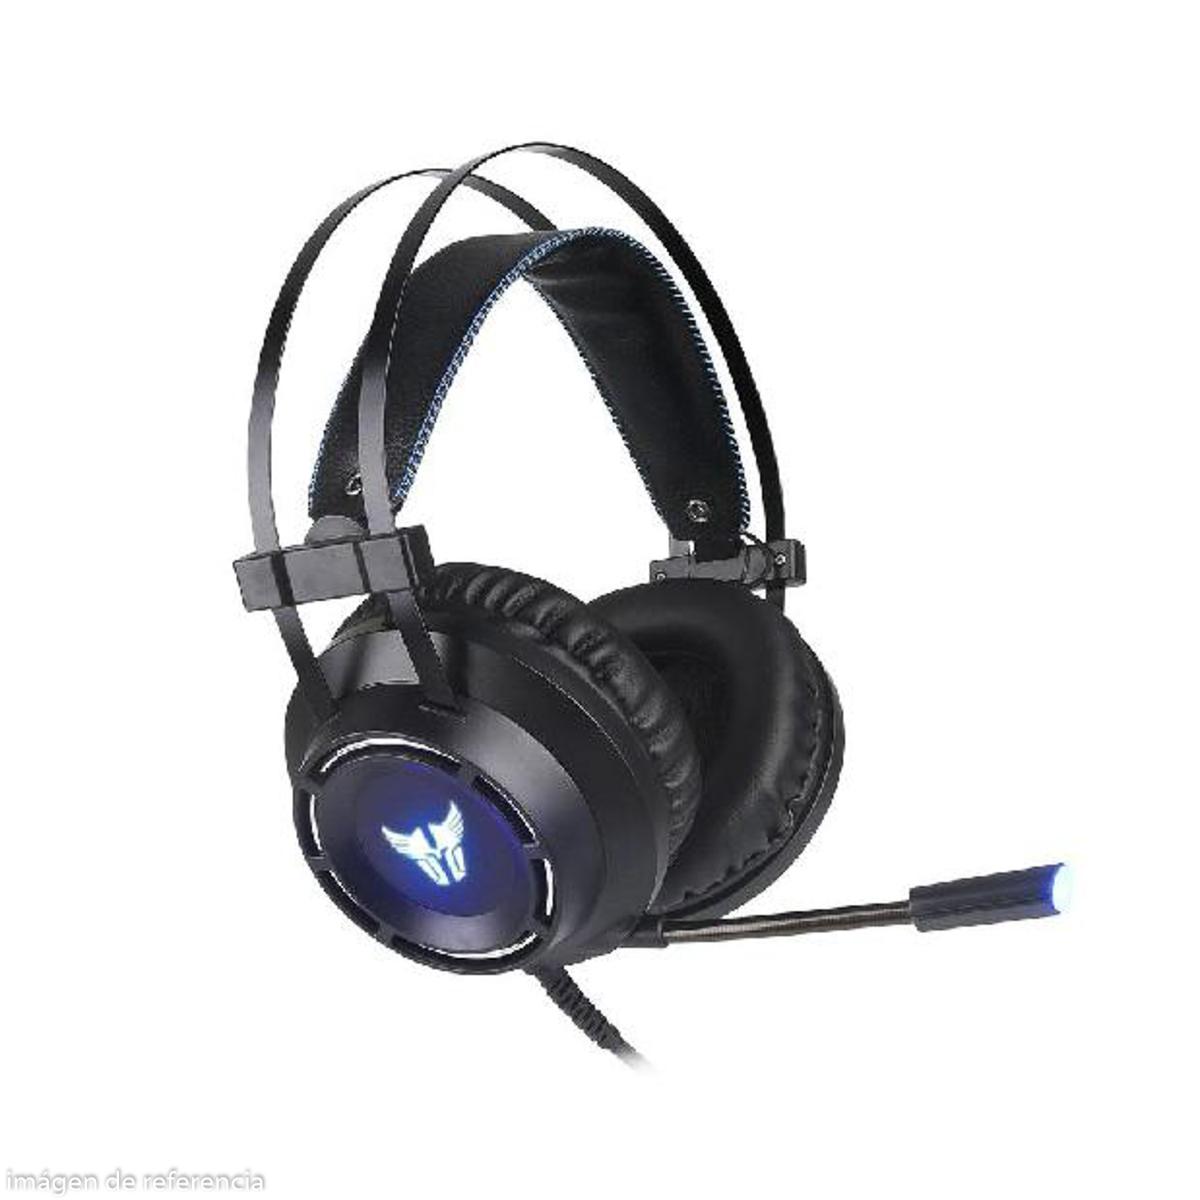 AURICULARES GAMING C/MIC HS46 USB 2.0